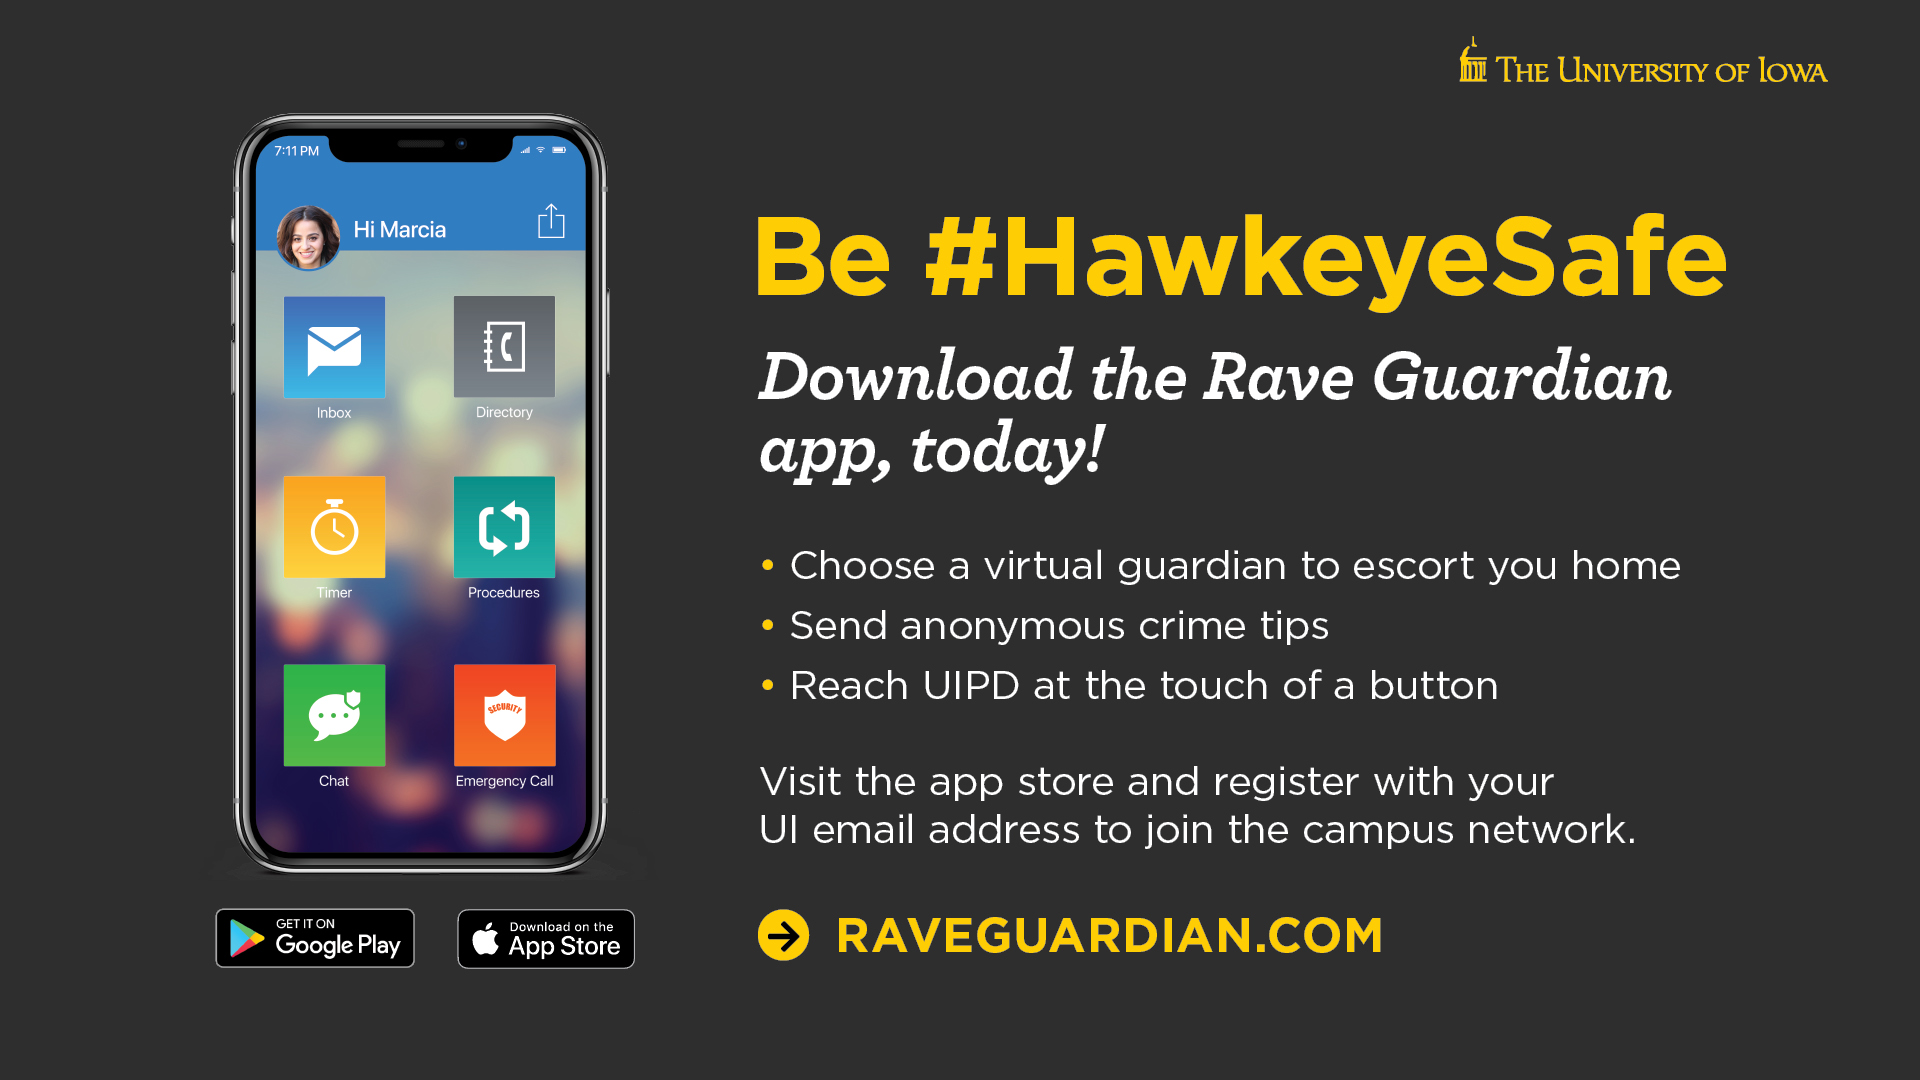 Download the Rave Guardian App, today!